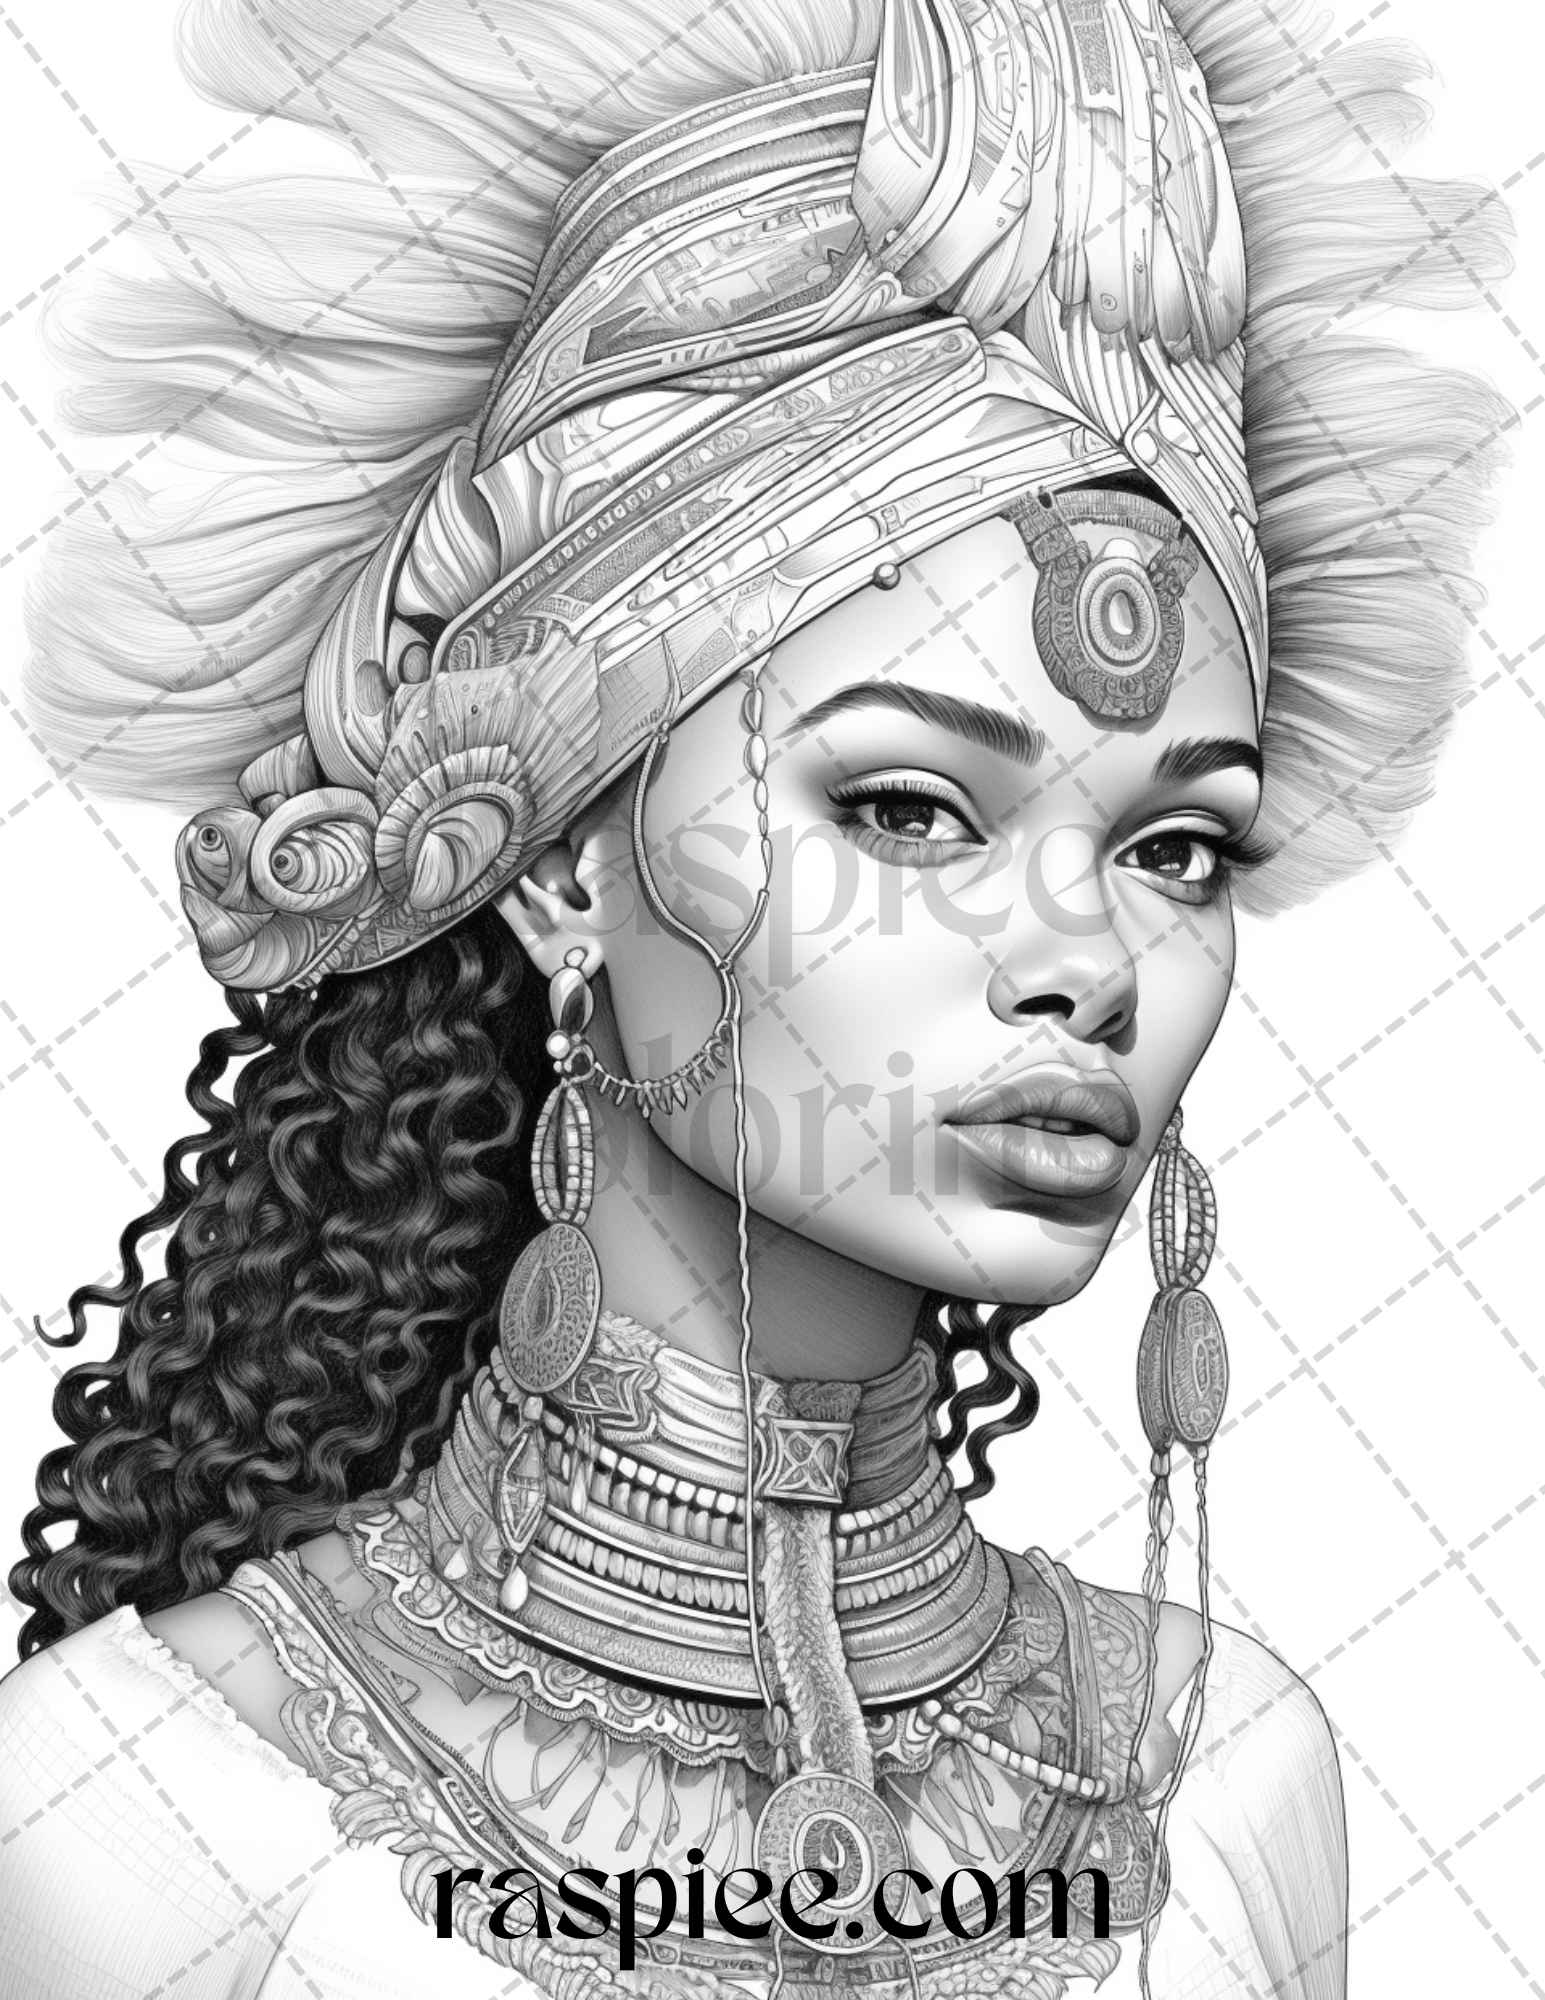 African women grayscale coloring pages, printable grayscale coloring pages, adult coloring pages, African women art, African women illustrations, portrait coloring pages for adults